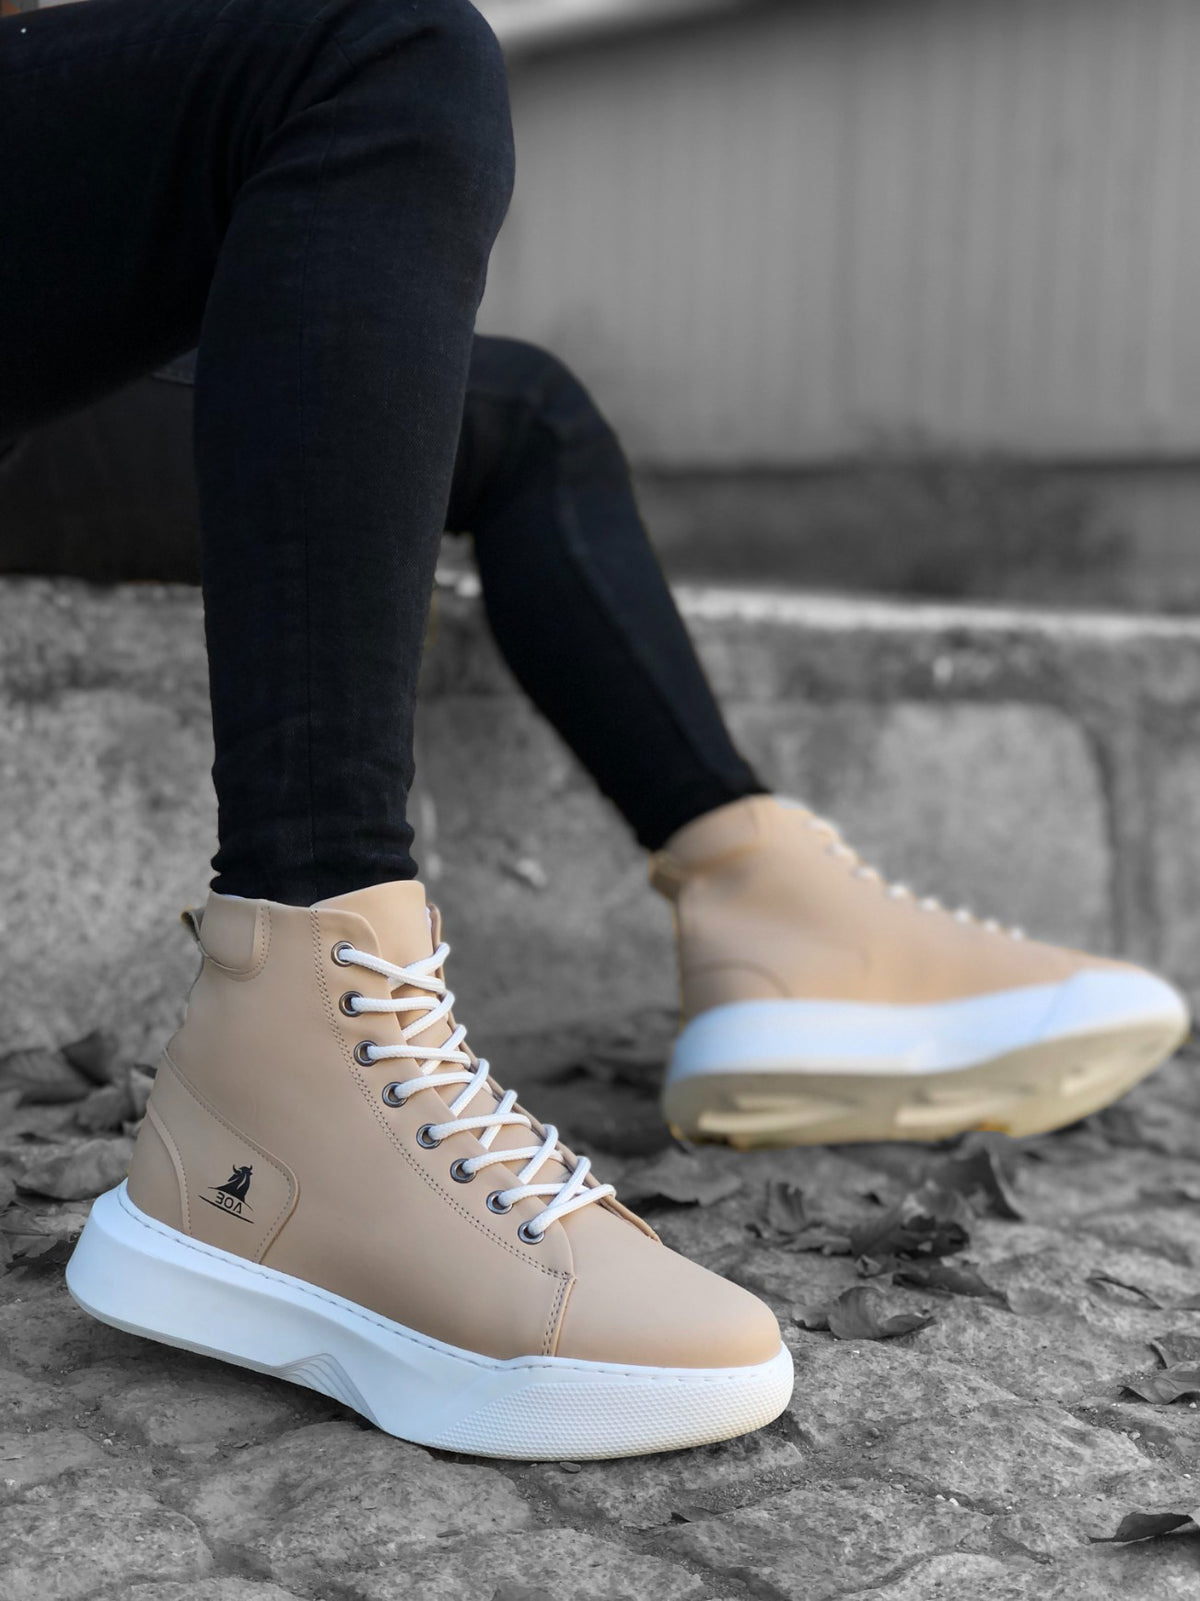 BA0155 Lace-up Men's High-Sole Cream White Sole Sports Boots - STREETMODE™